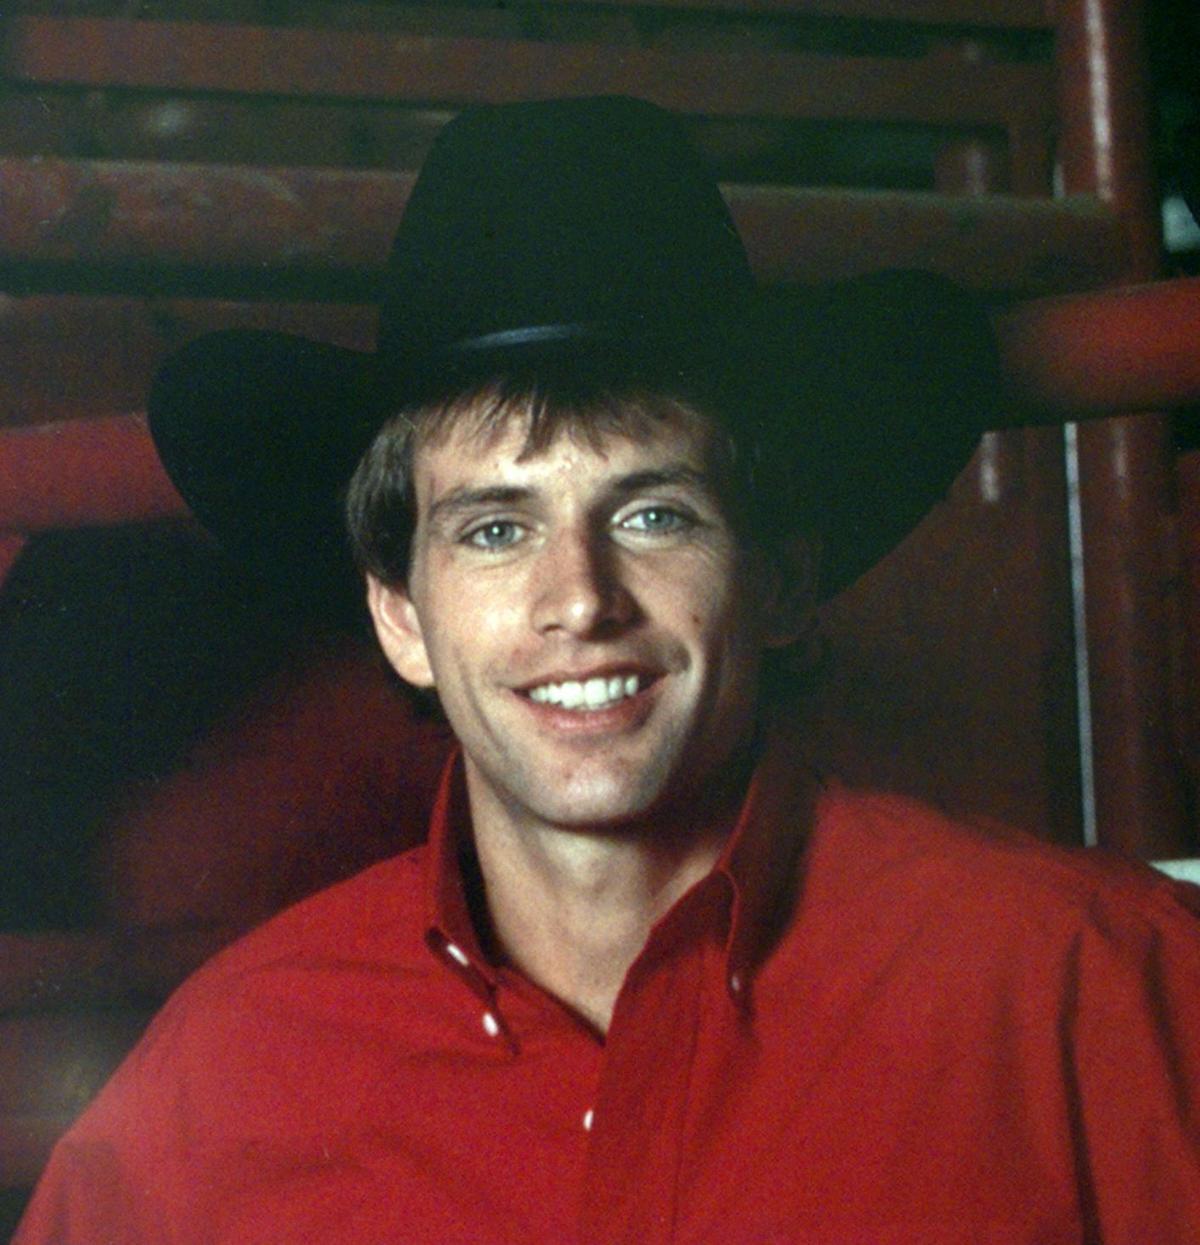 'He was a great person' Lane Frost's mother has special feelings about